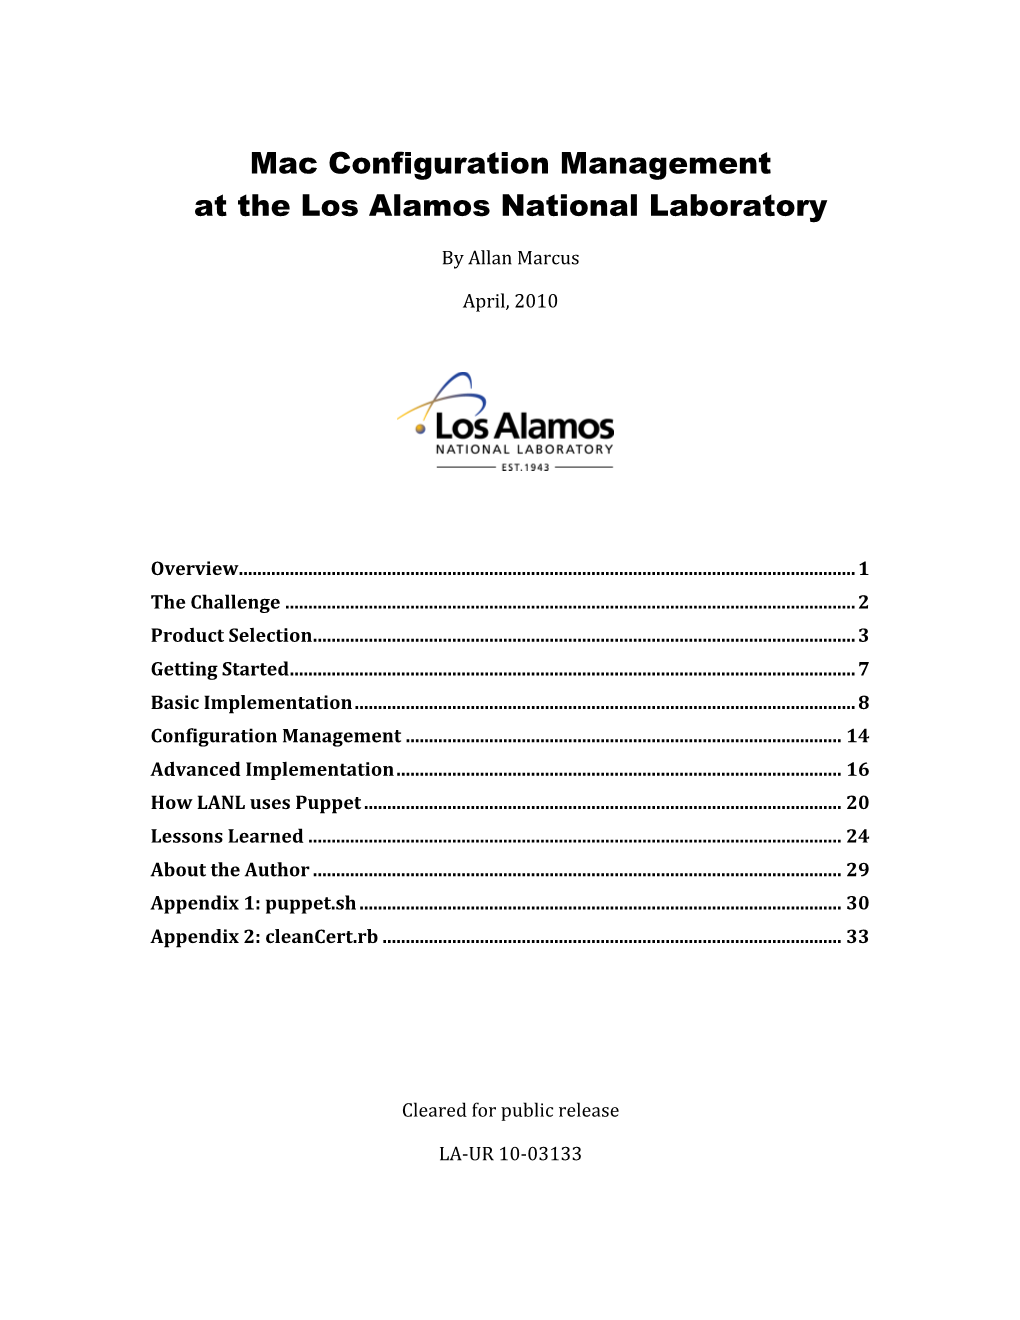 Configuration Management at the Los Alamos National Laboratory